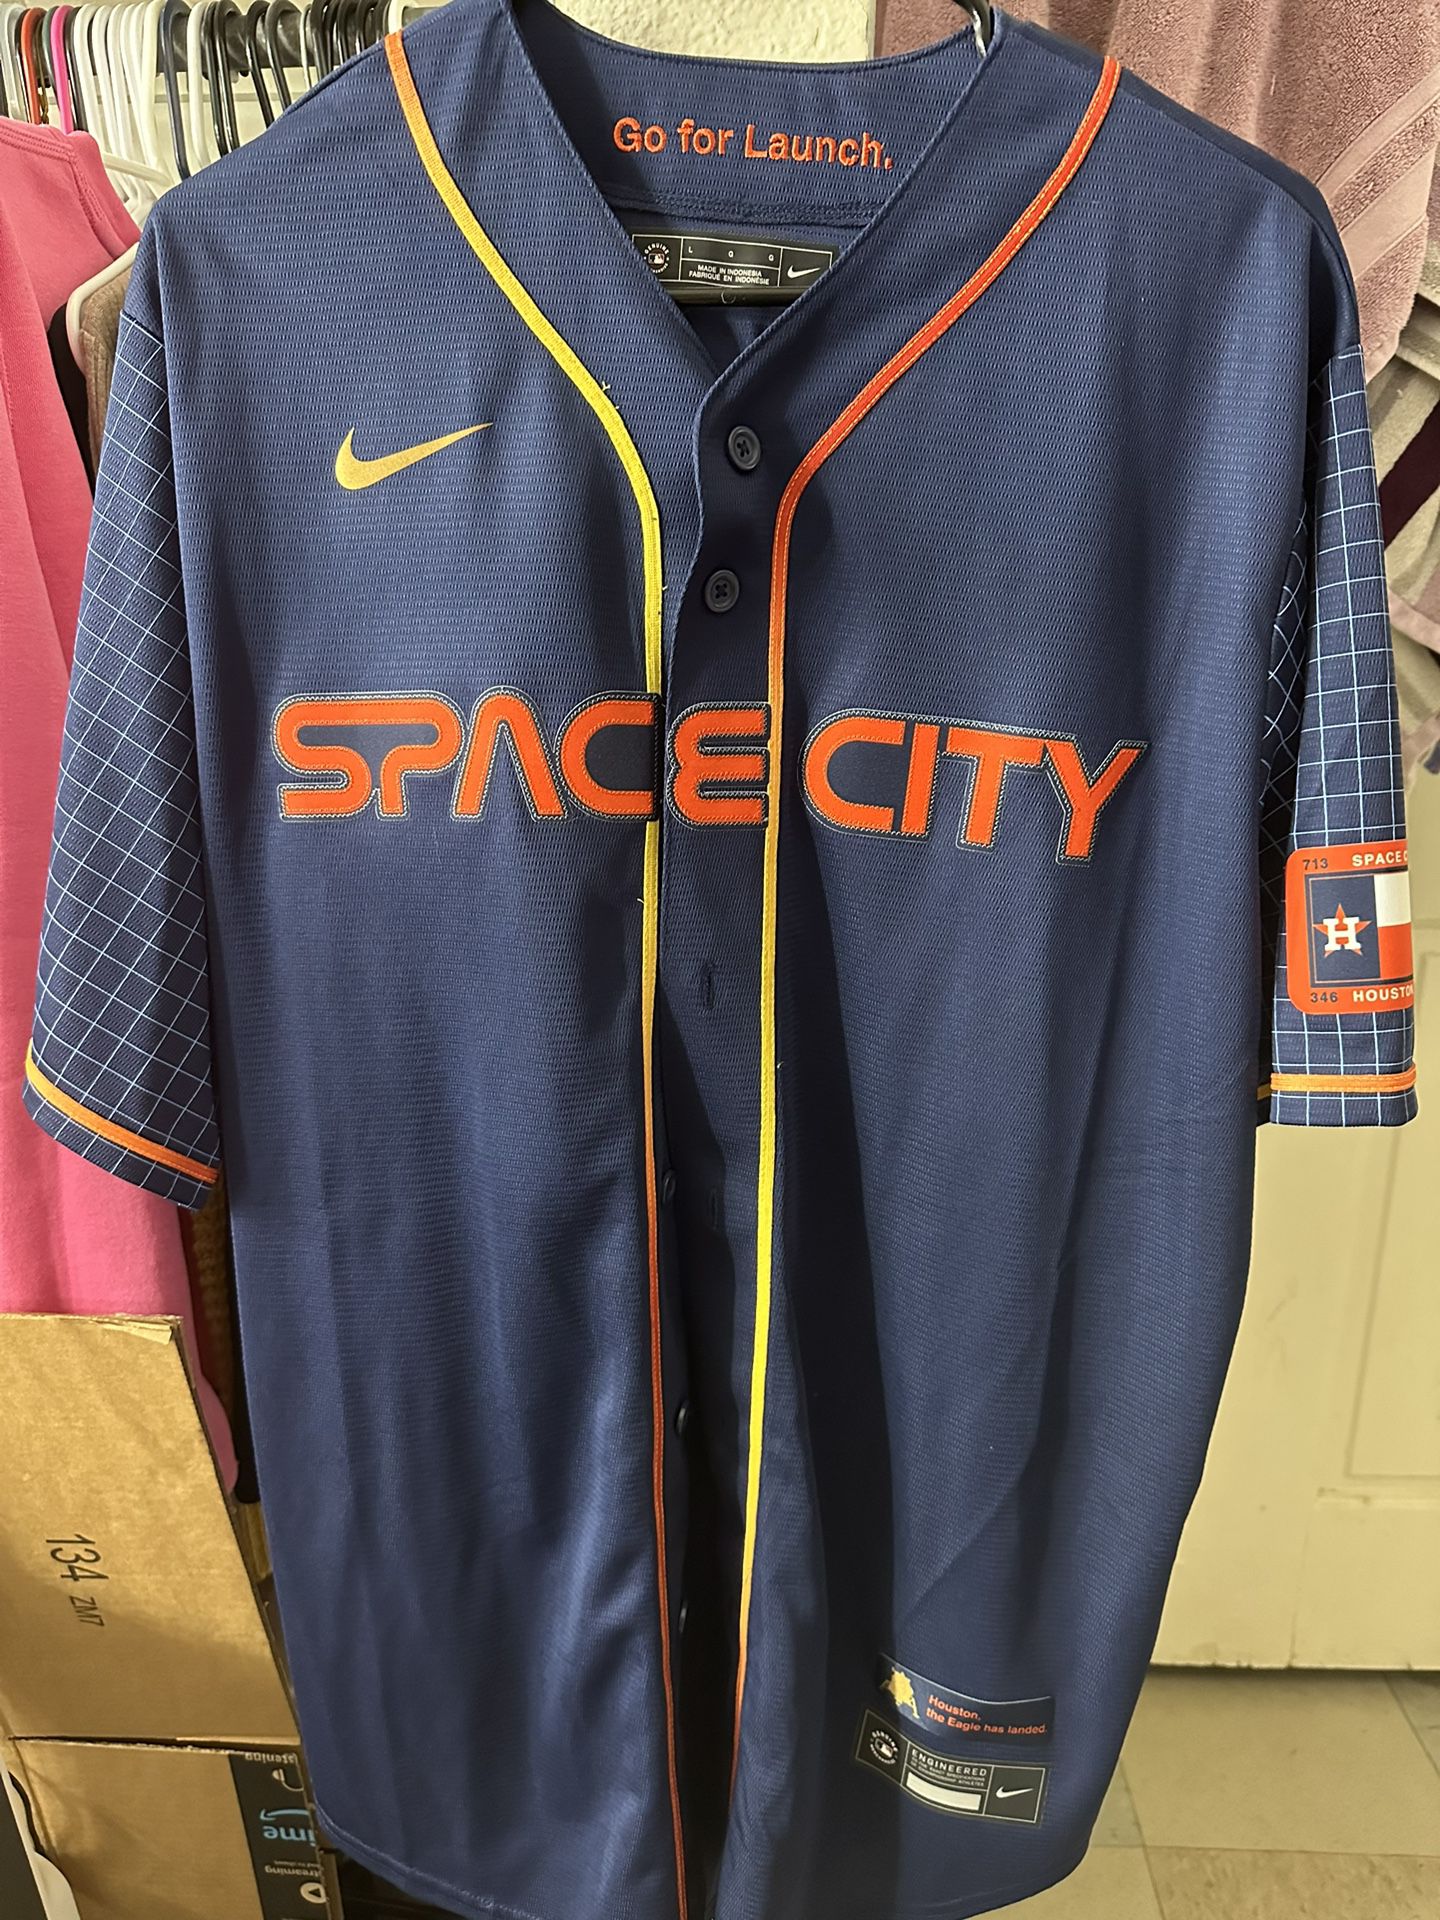 Hardwood Classic McGrady Jersey for Sale in Houston, TX - OfferUp